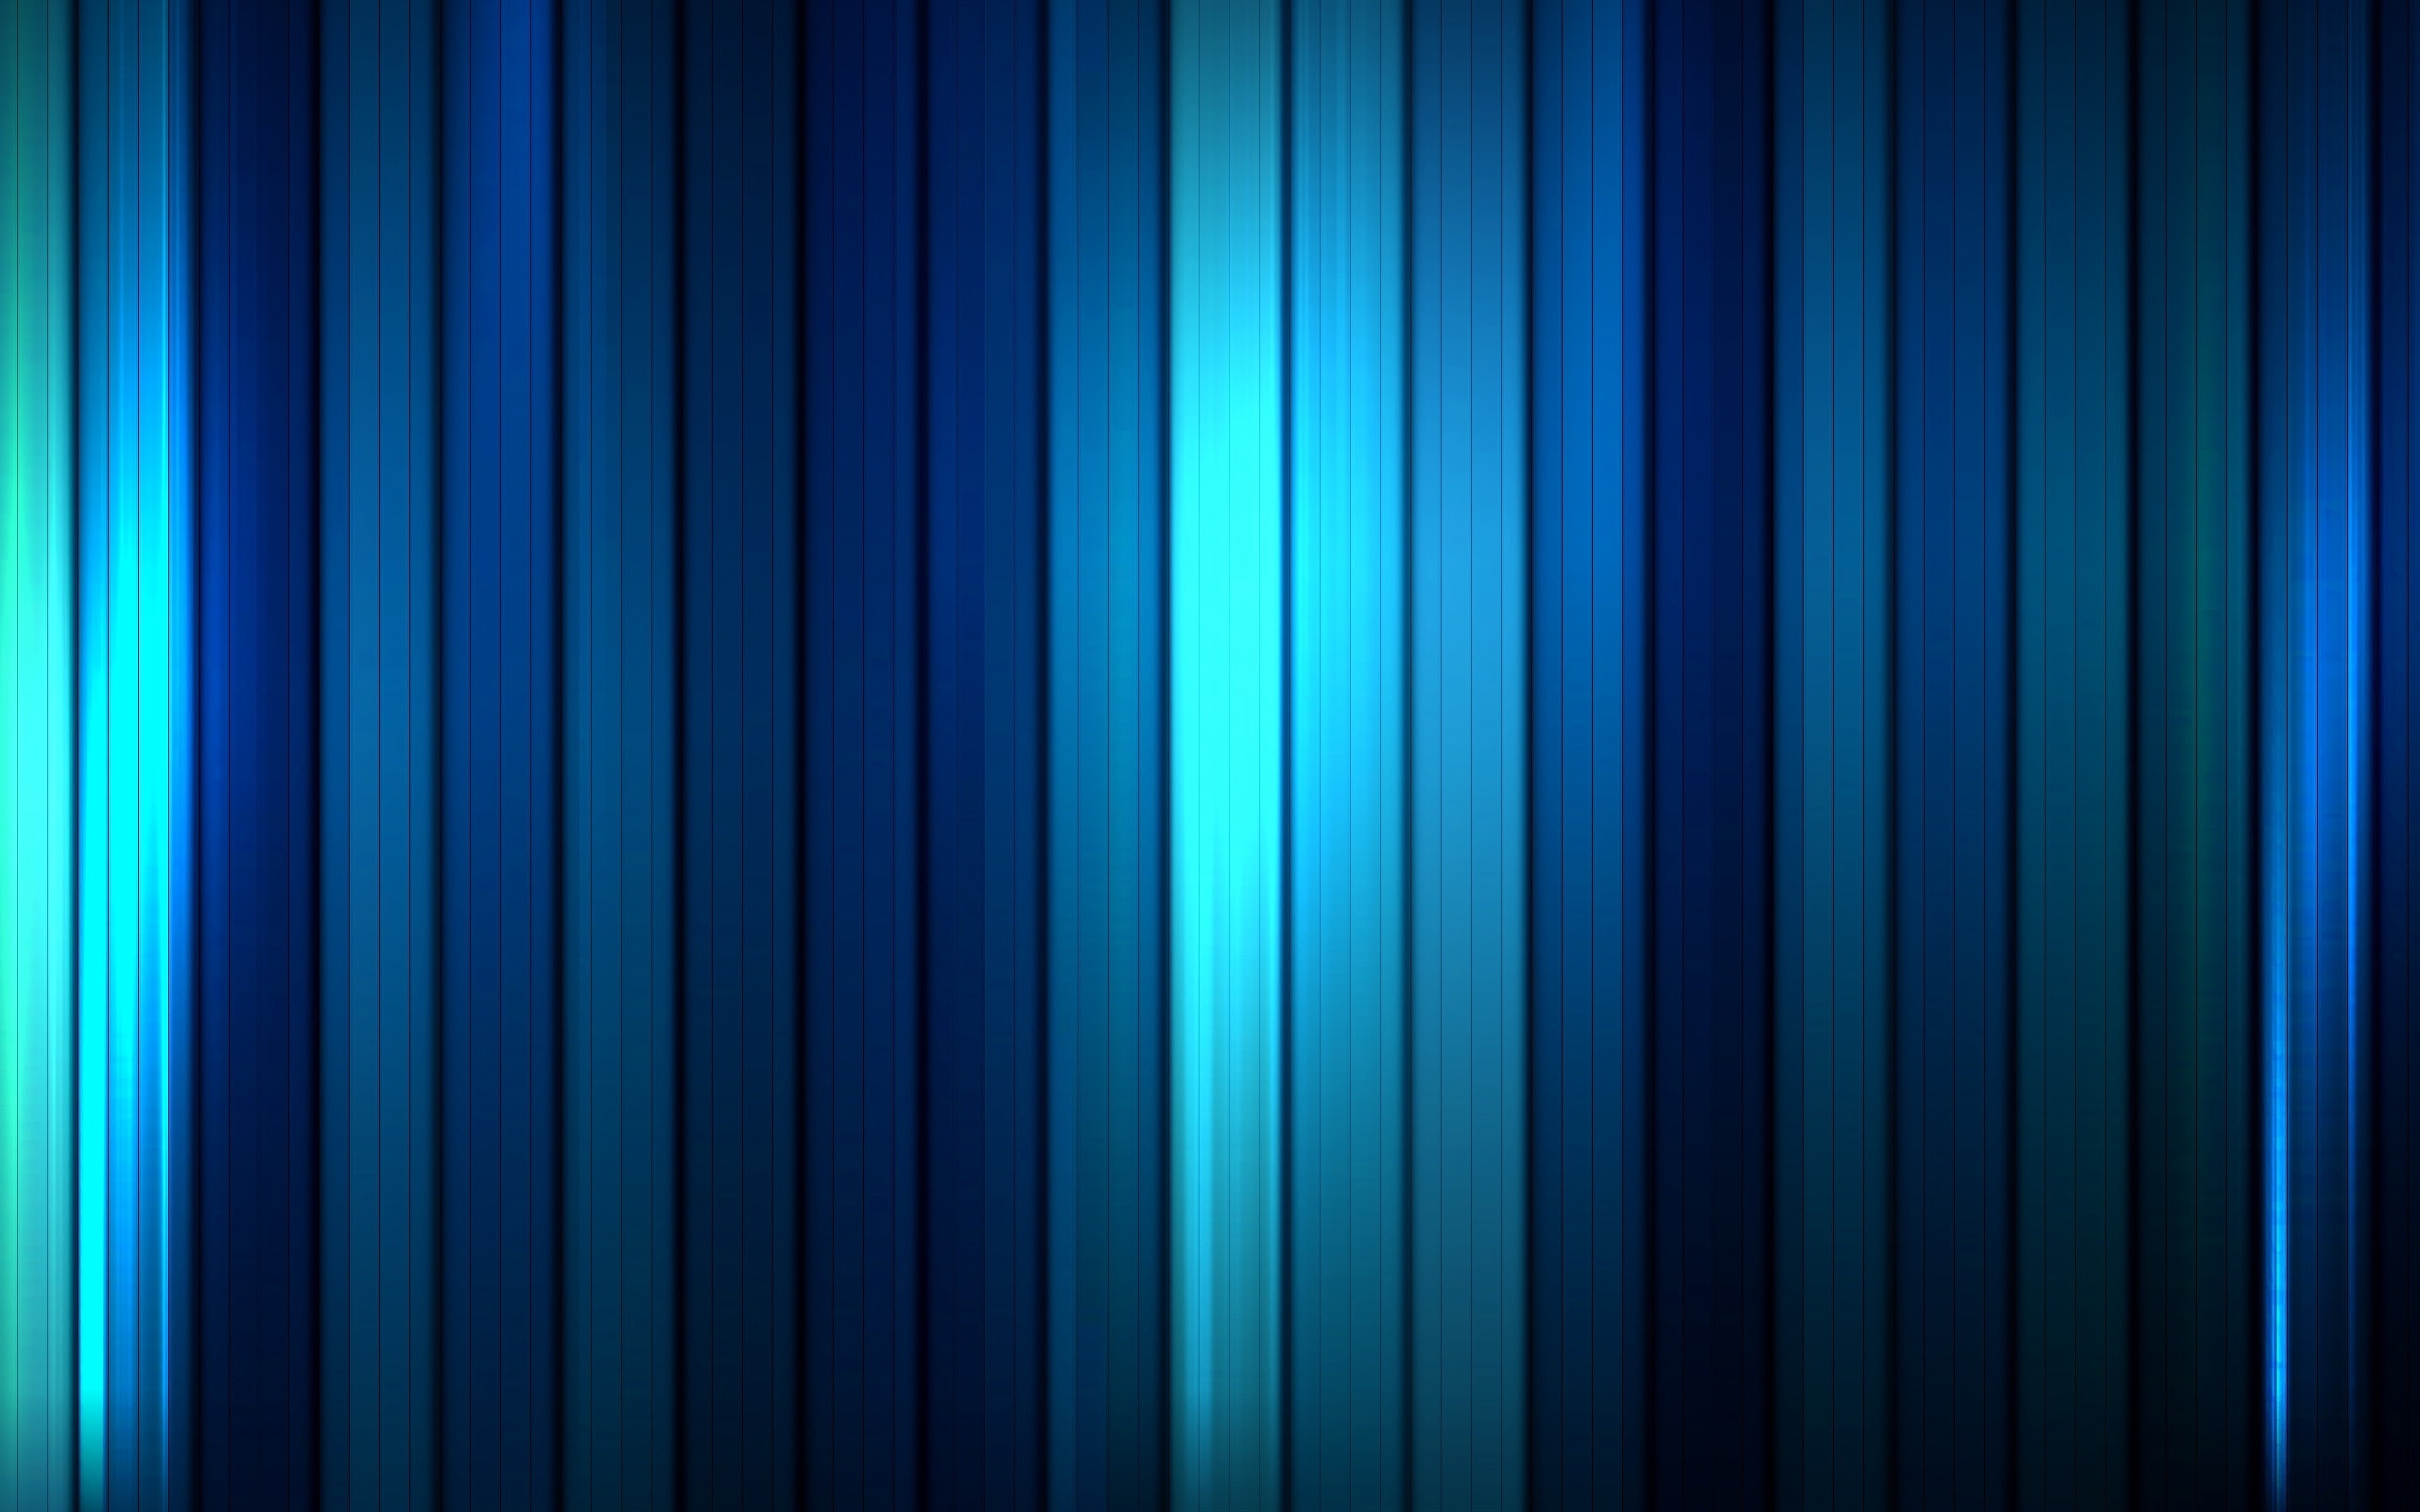 Motion Stripes for 2560 x 1600 widescreen resolution